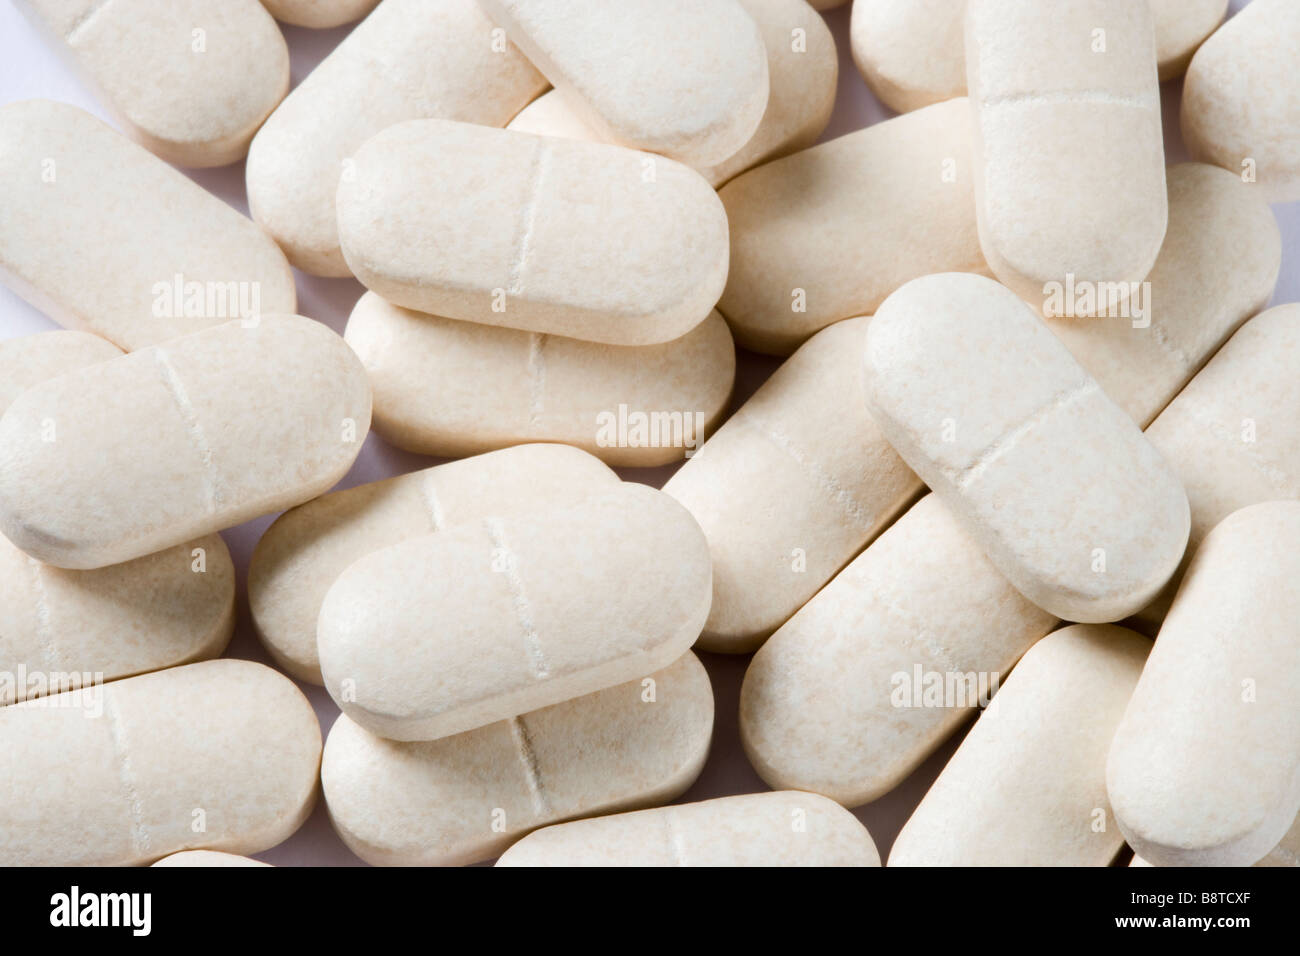 Nutritional supplement tablets (Glucosamine sulphate) Stock Photo